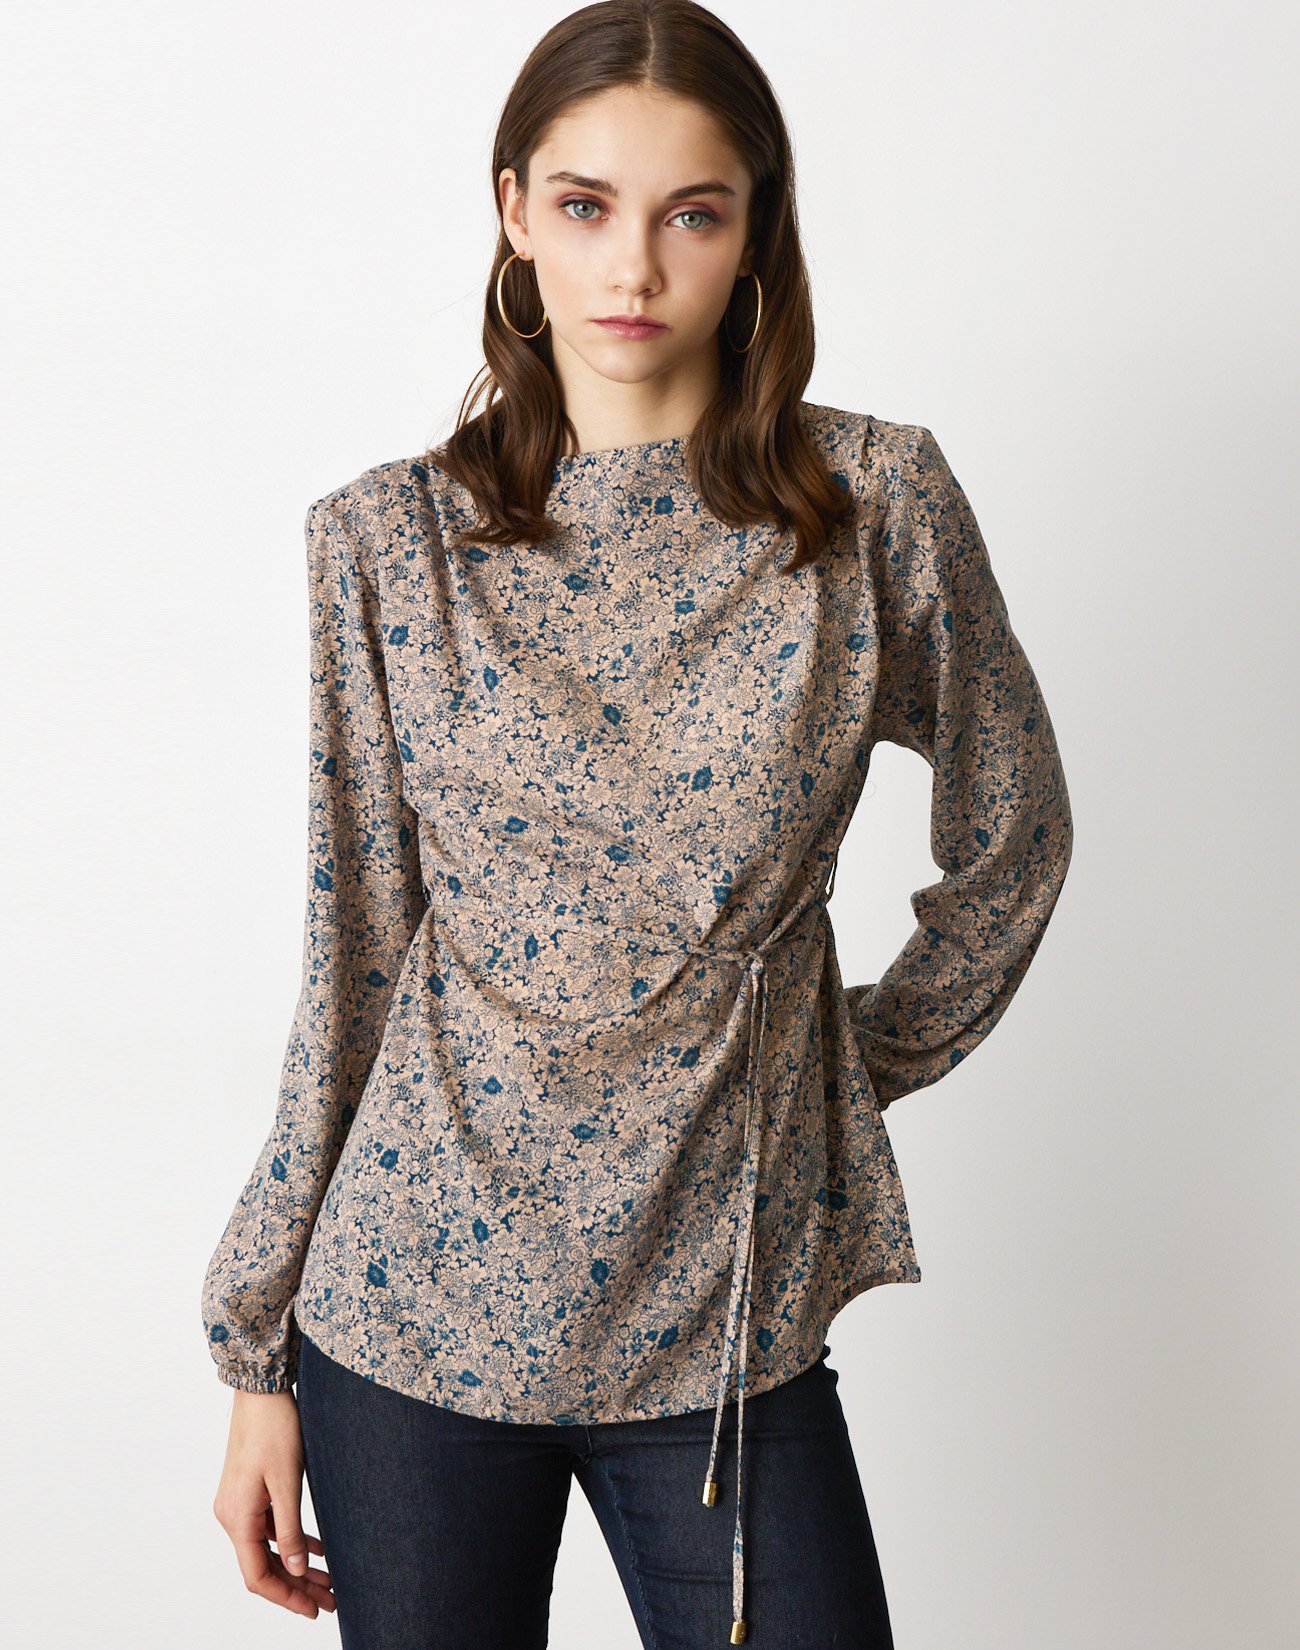 Printed satin top with shoulder pads